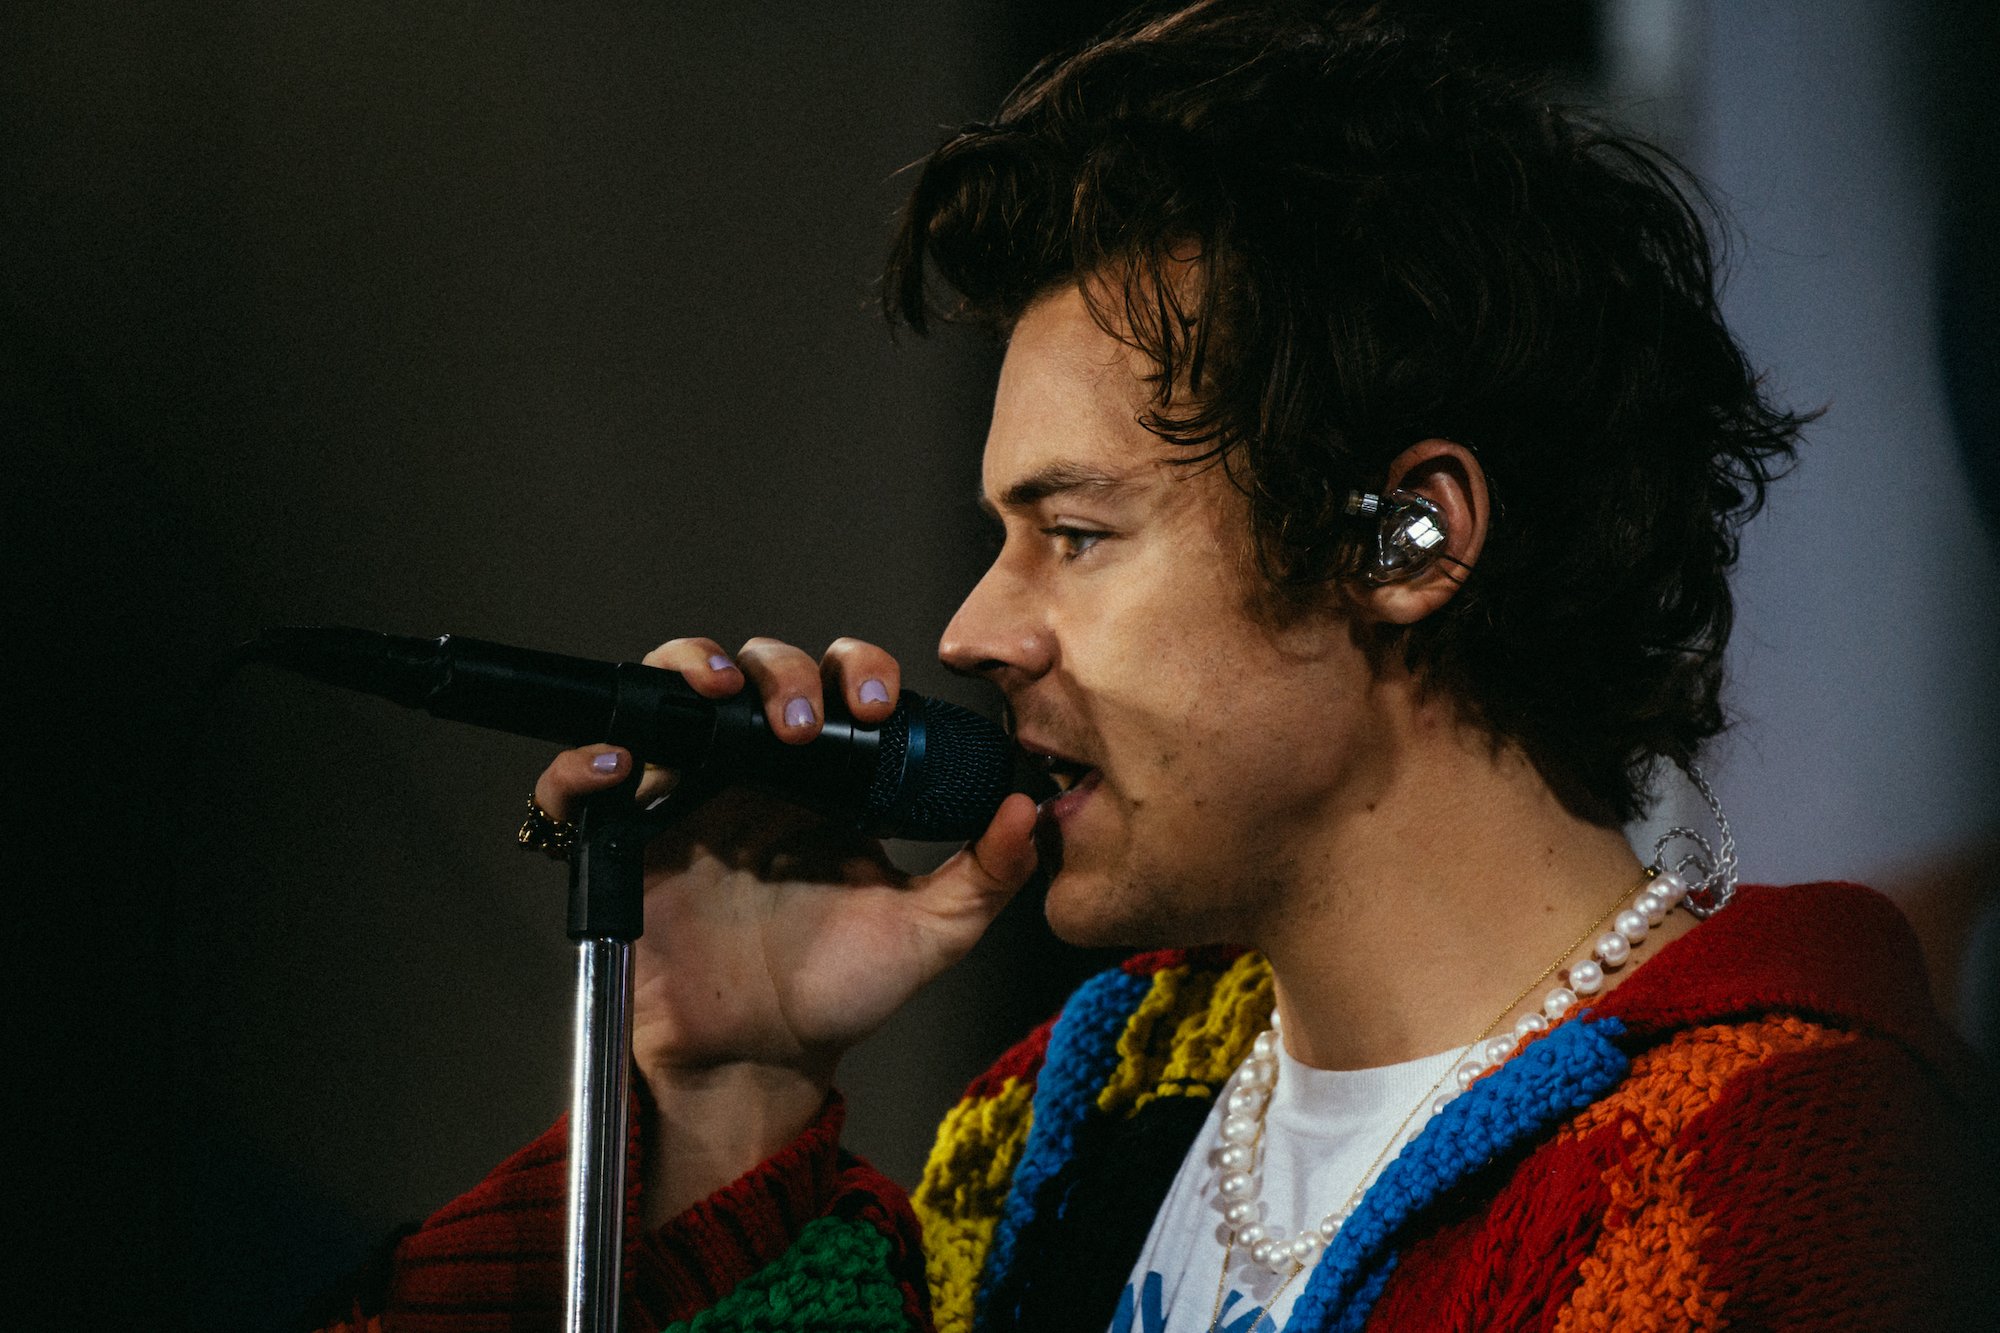 Harry Styles rehearsing for The TODAY Show on Feb. 26, 2020.